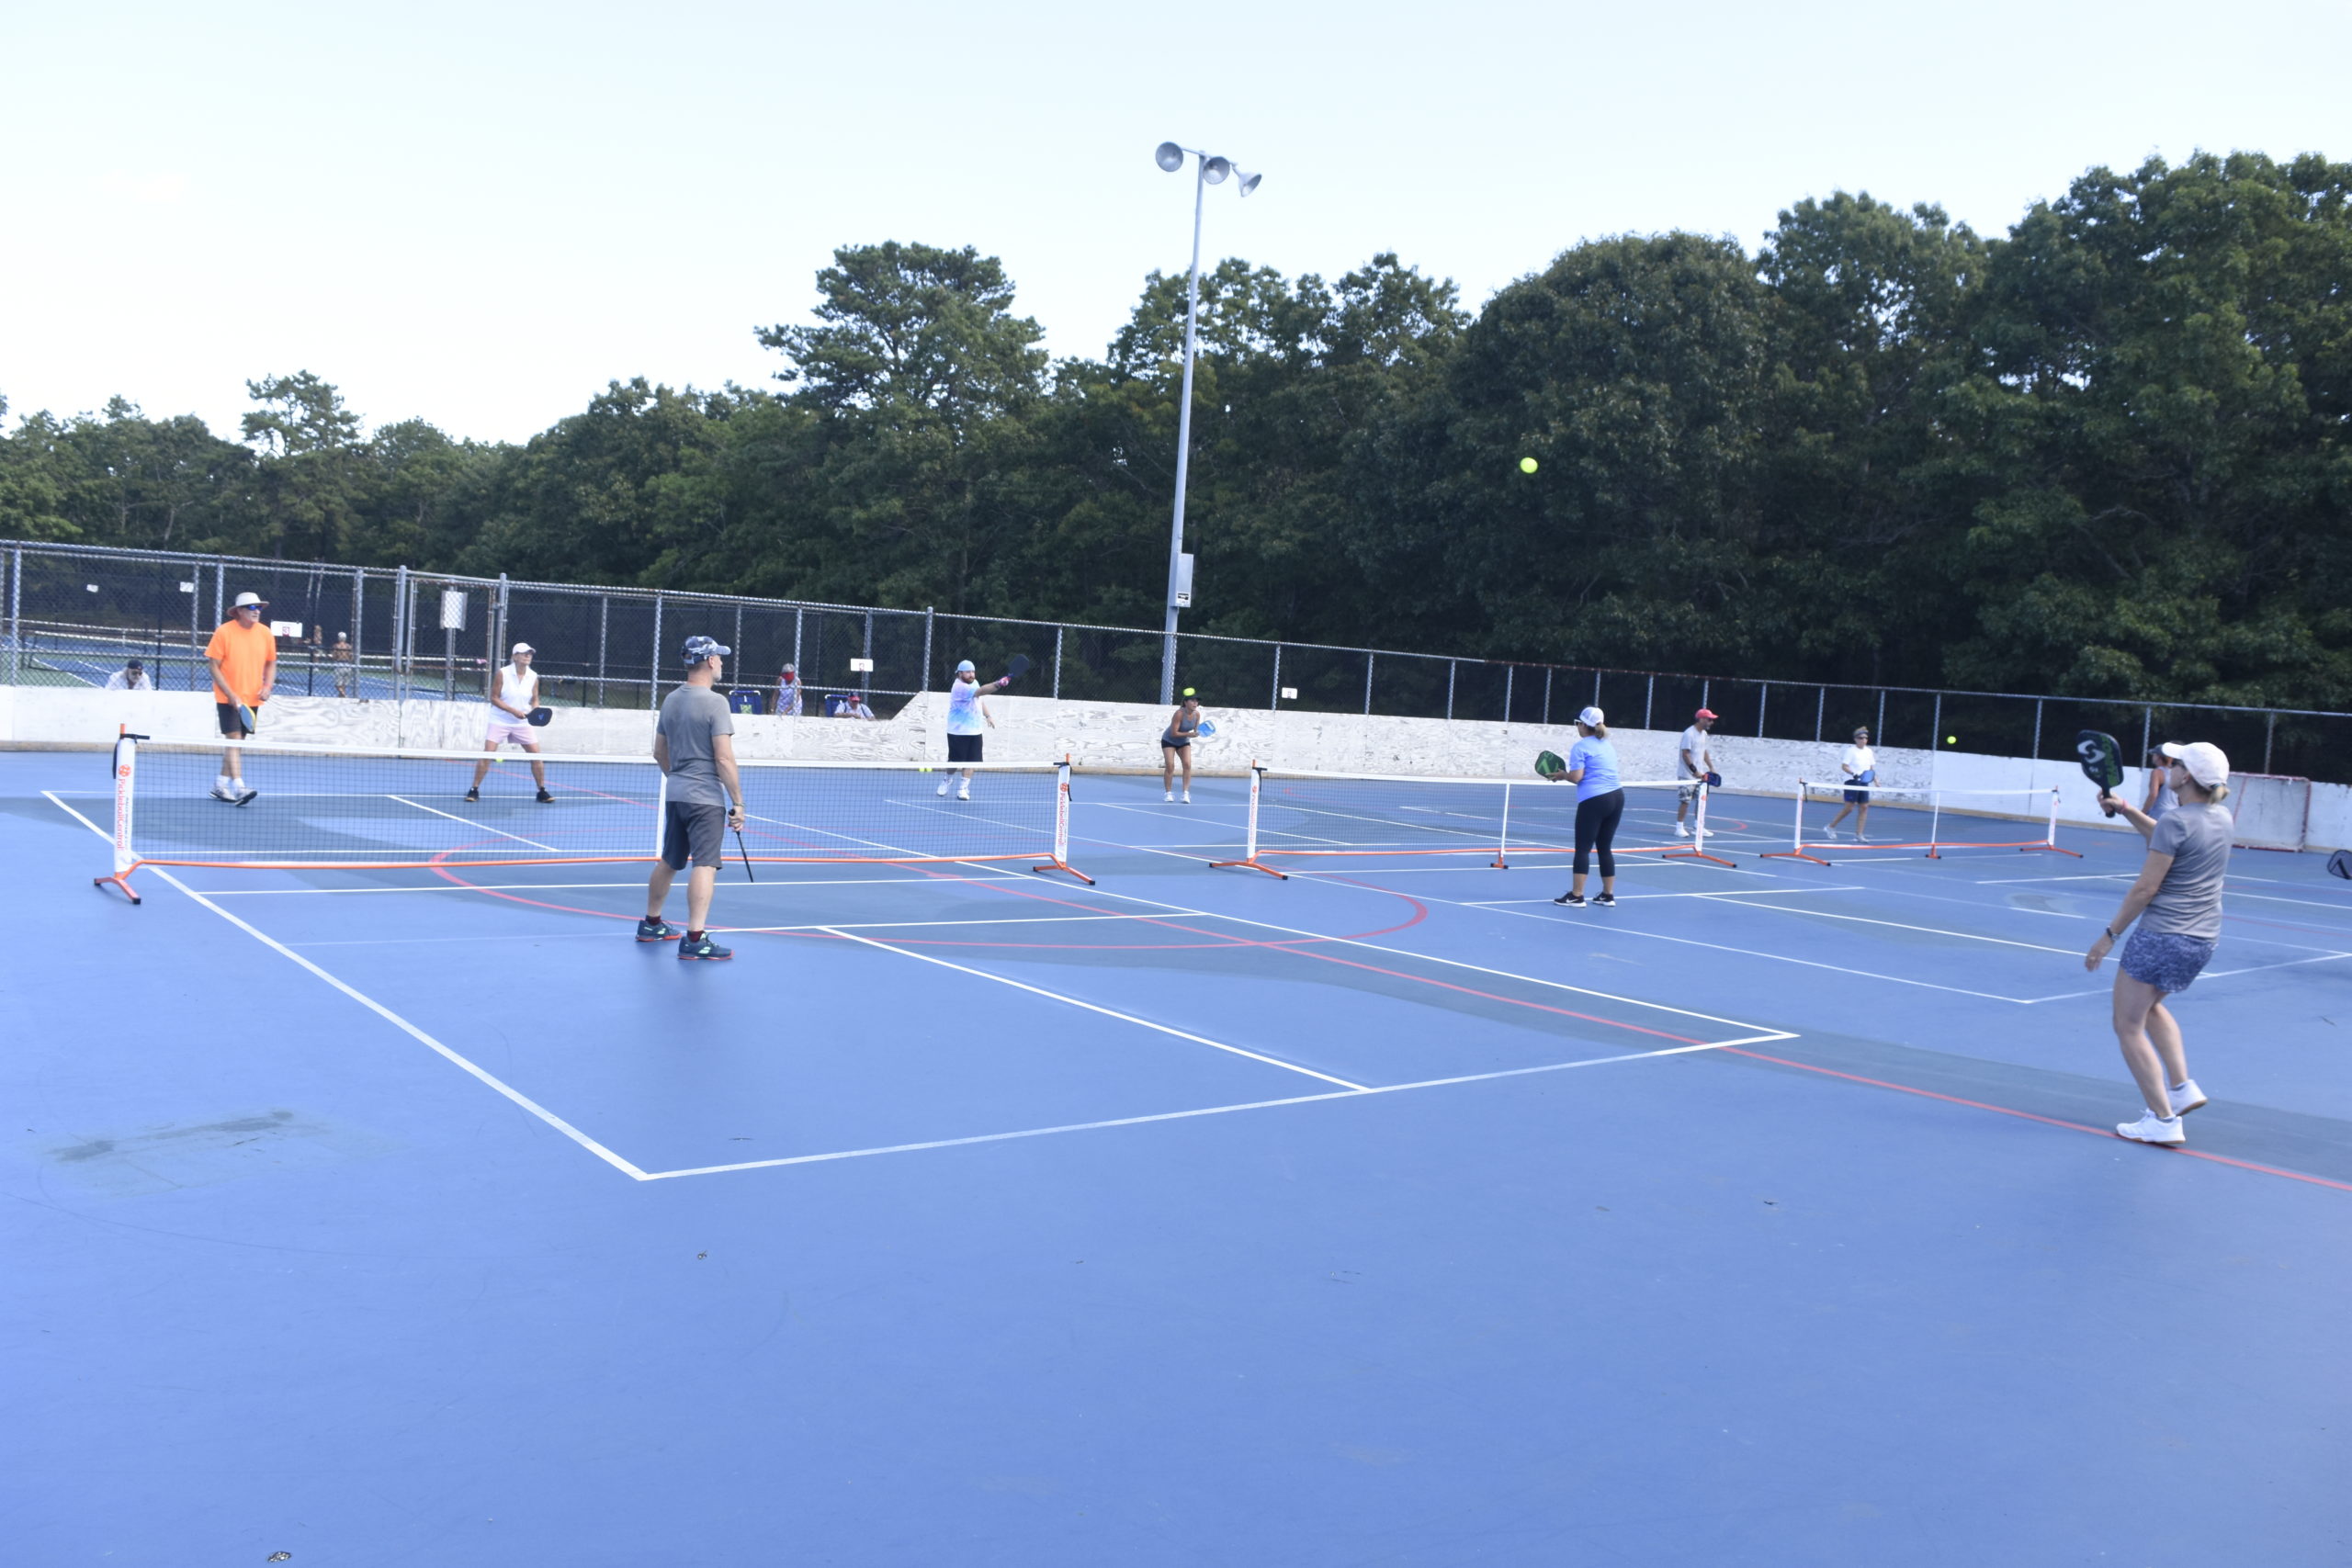 Over 110 people gathered at Red Creek Park in Hampton Bays this past weekend to partake in a pickleball tournament.